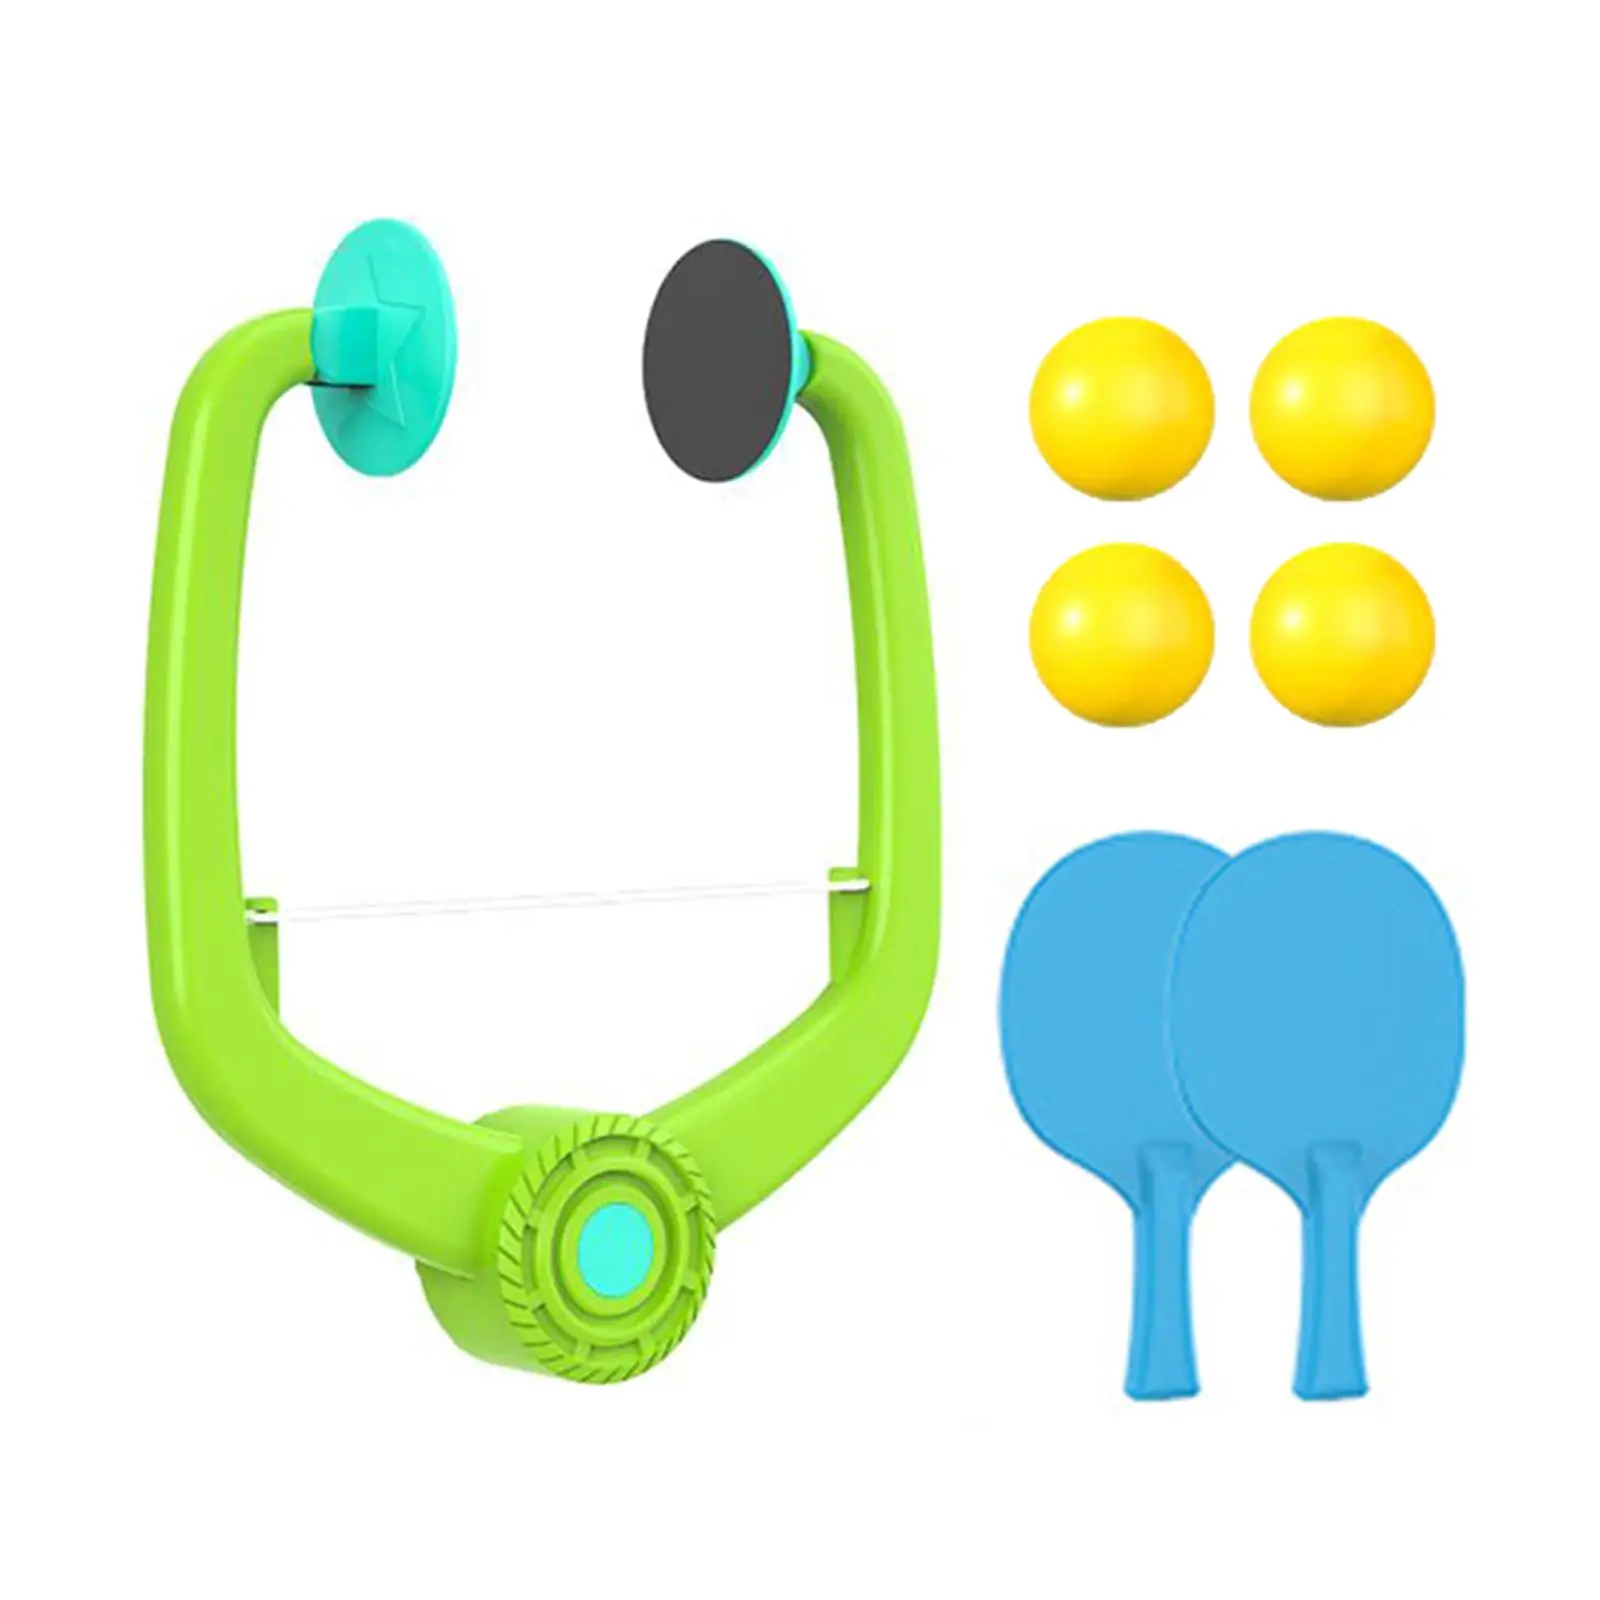 Table Tennis Trainer Set Accessories with 2 Paddles for Kids Sports Living Room